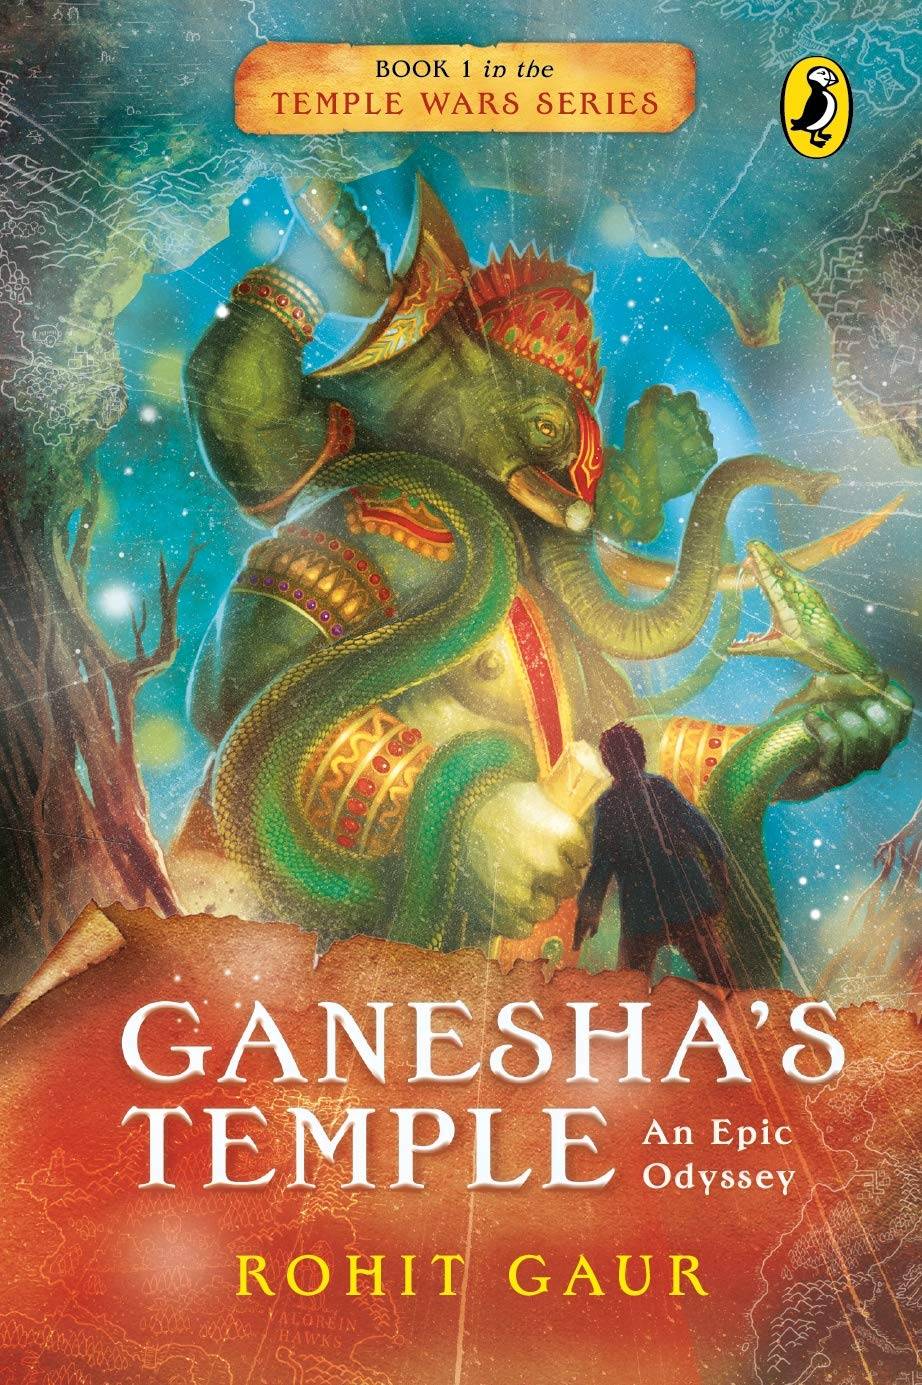 IMG : Temple wars Series Ganesha's Temple An epic Odyssey